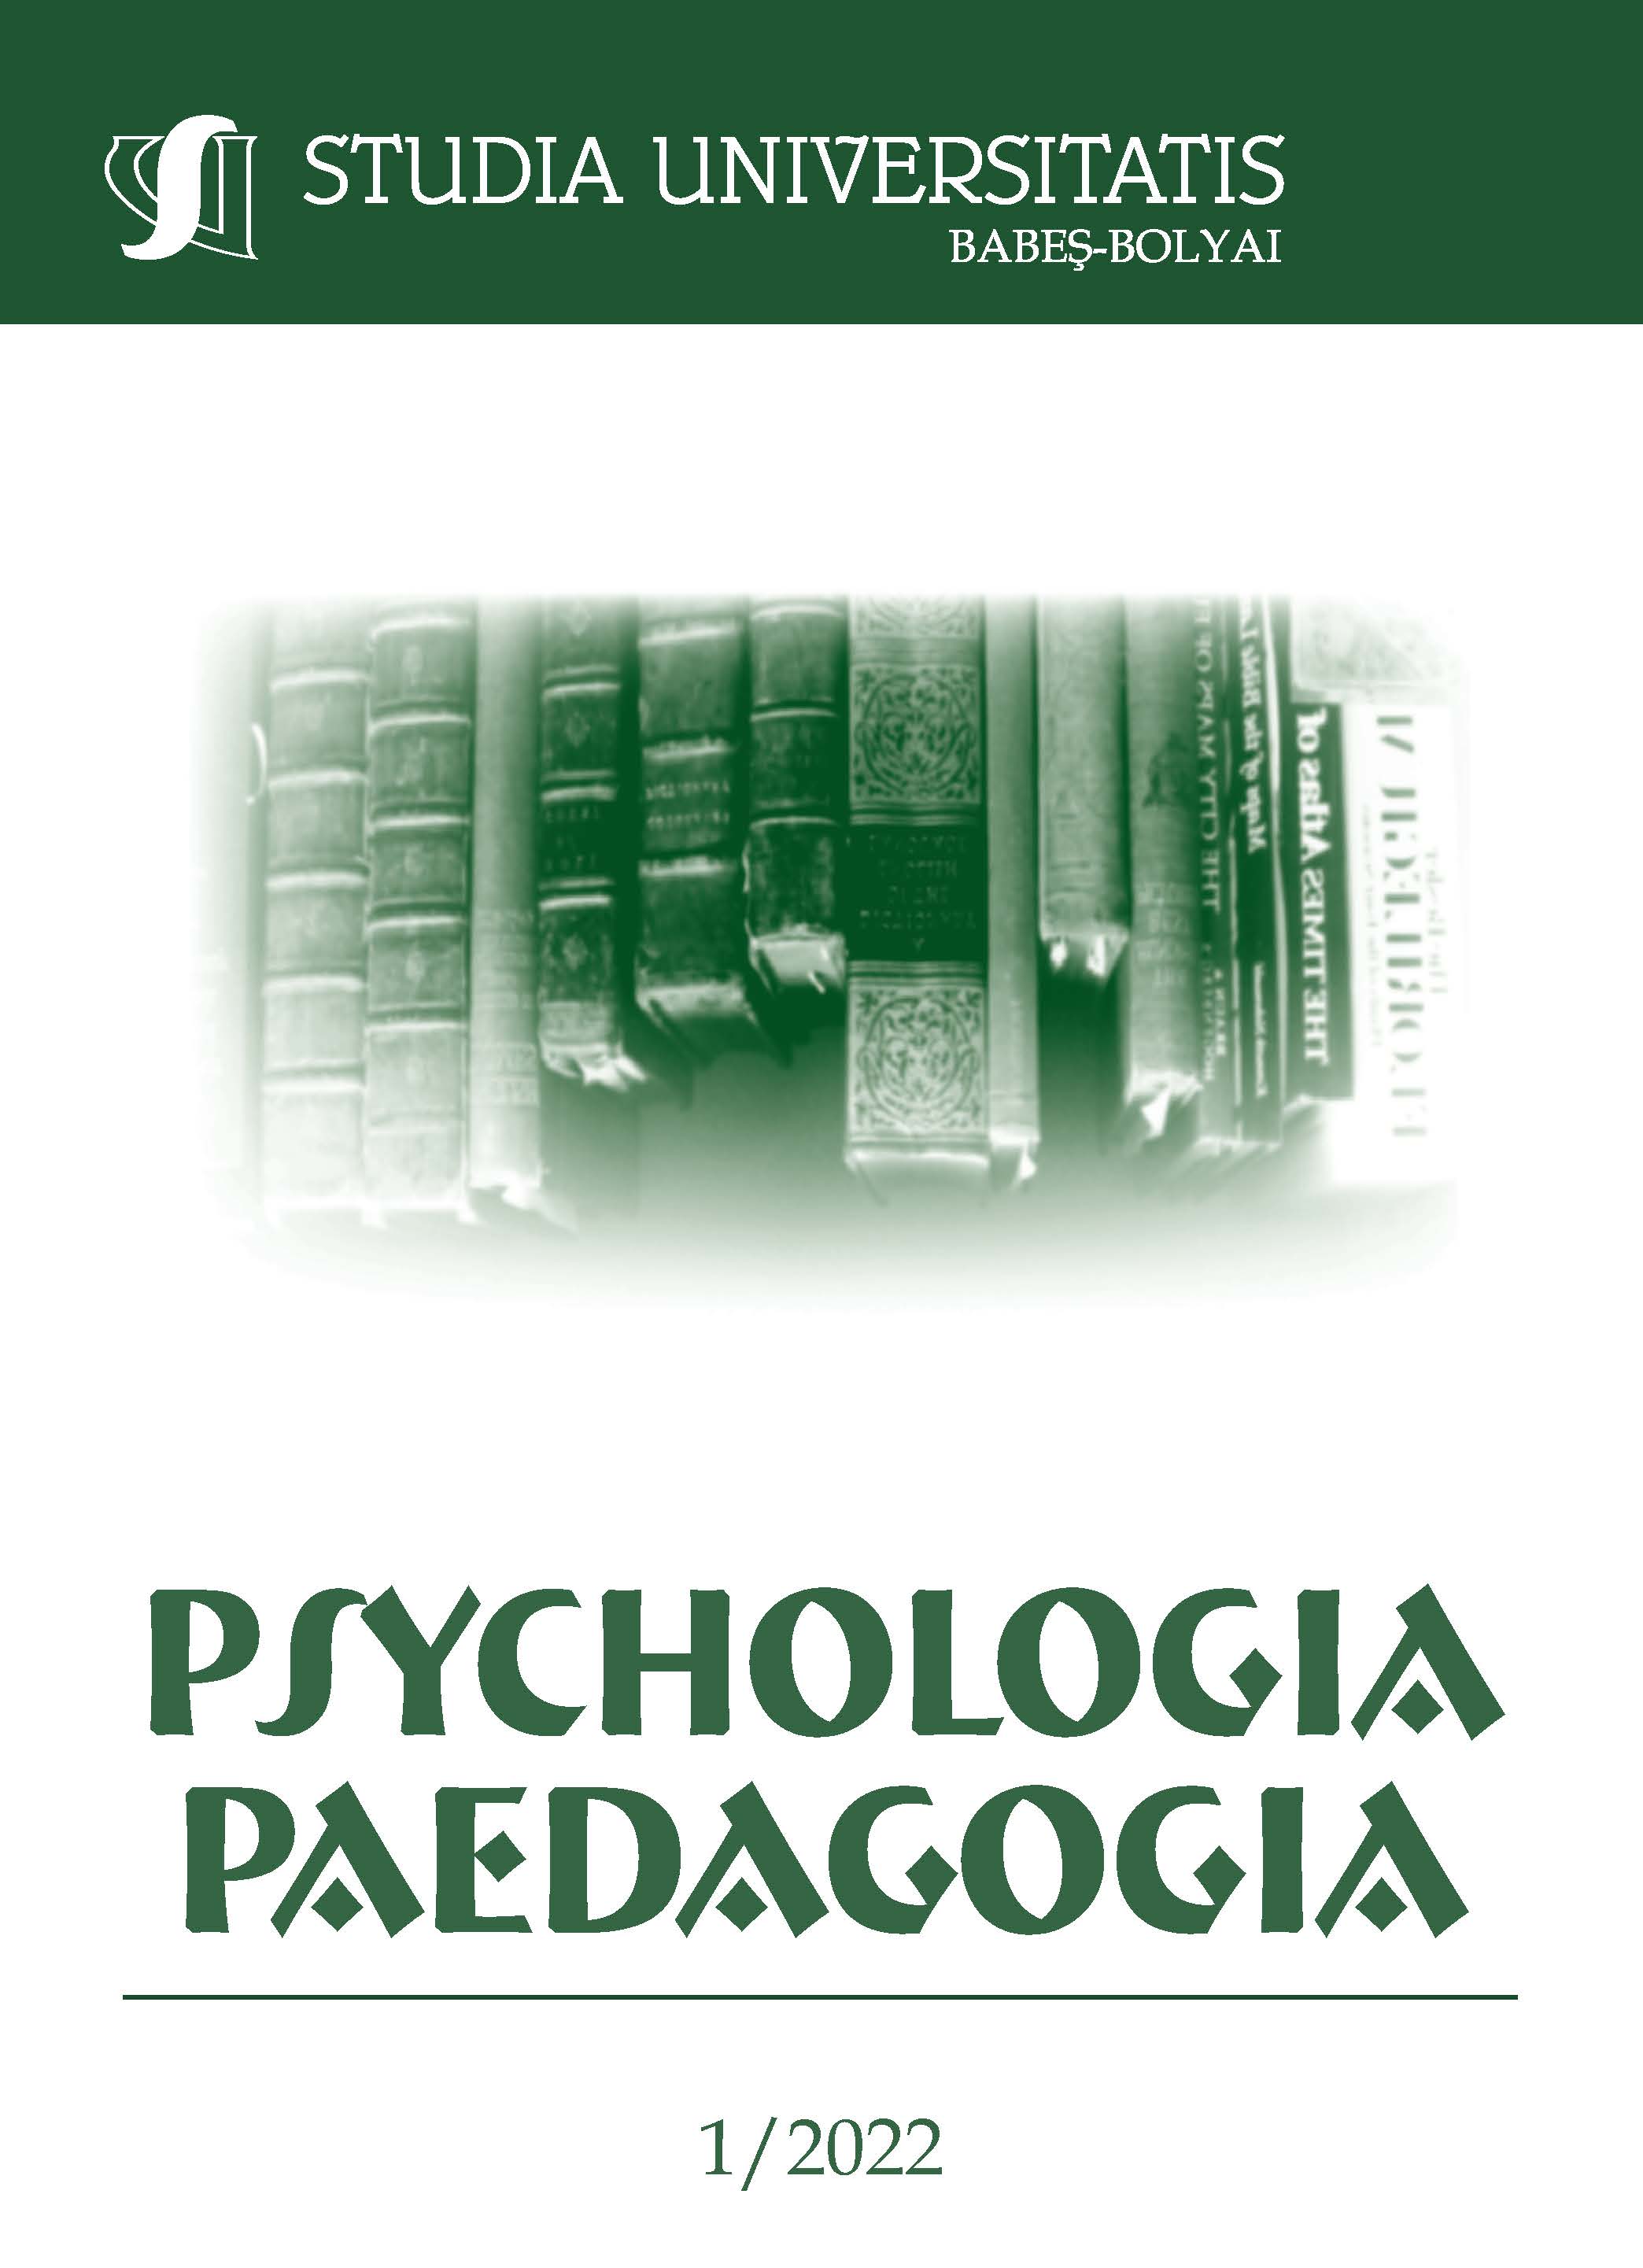 EXPLORING THE RELIGIOSITY OF ROMANIAN EMERGING ADULTS: PSYCHOLOGICAL AND DEMOGRAPHICAL CORRELATES